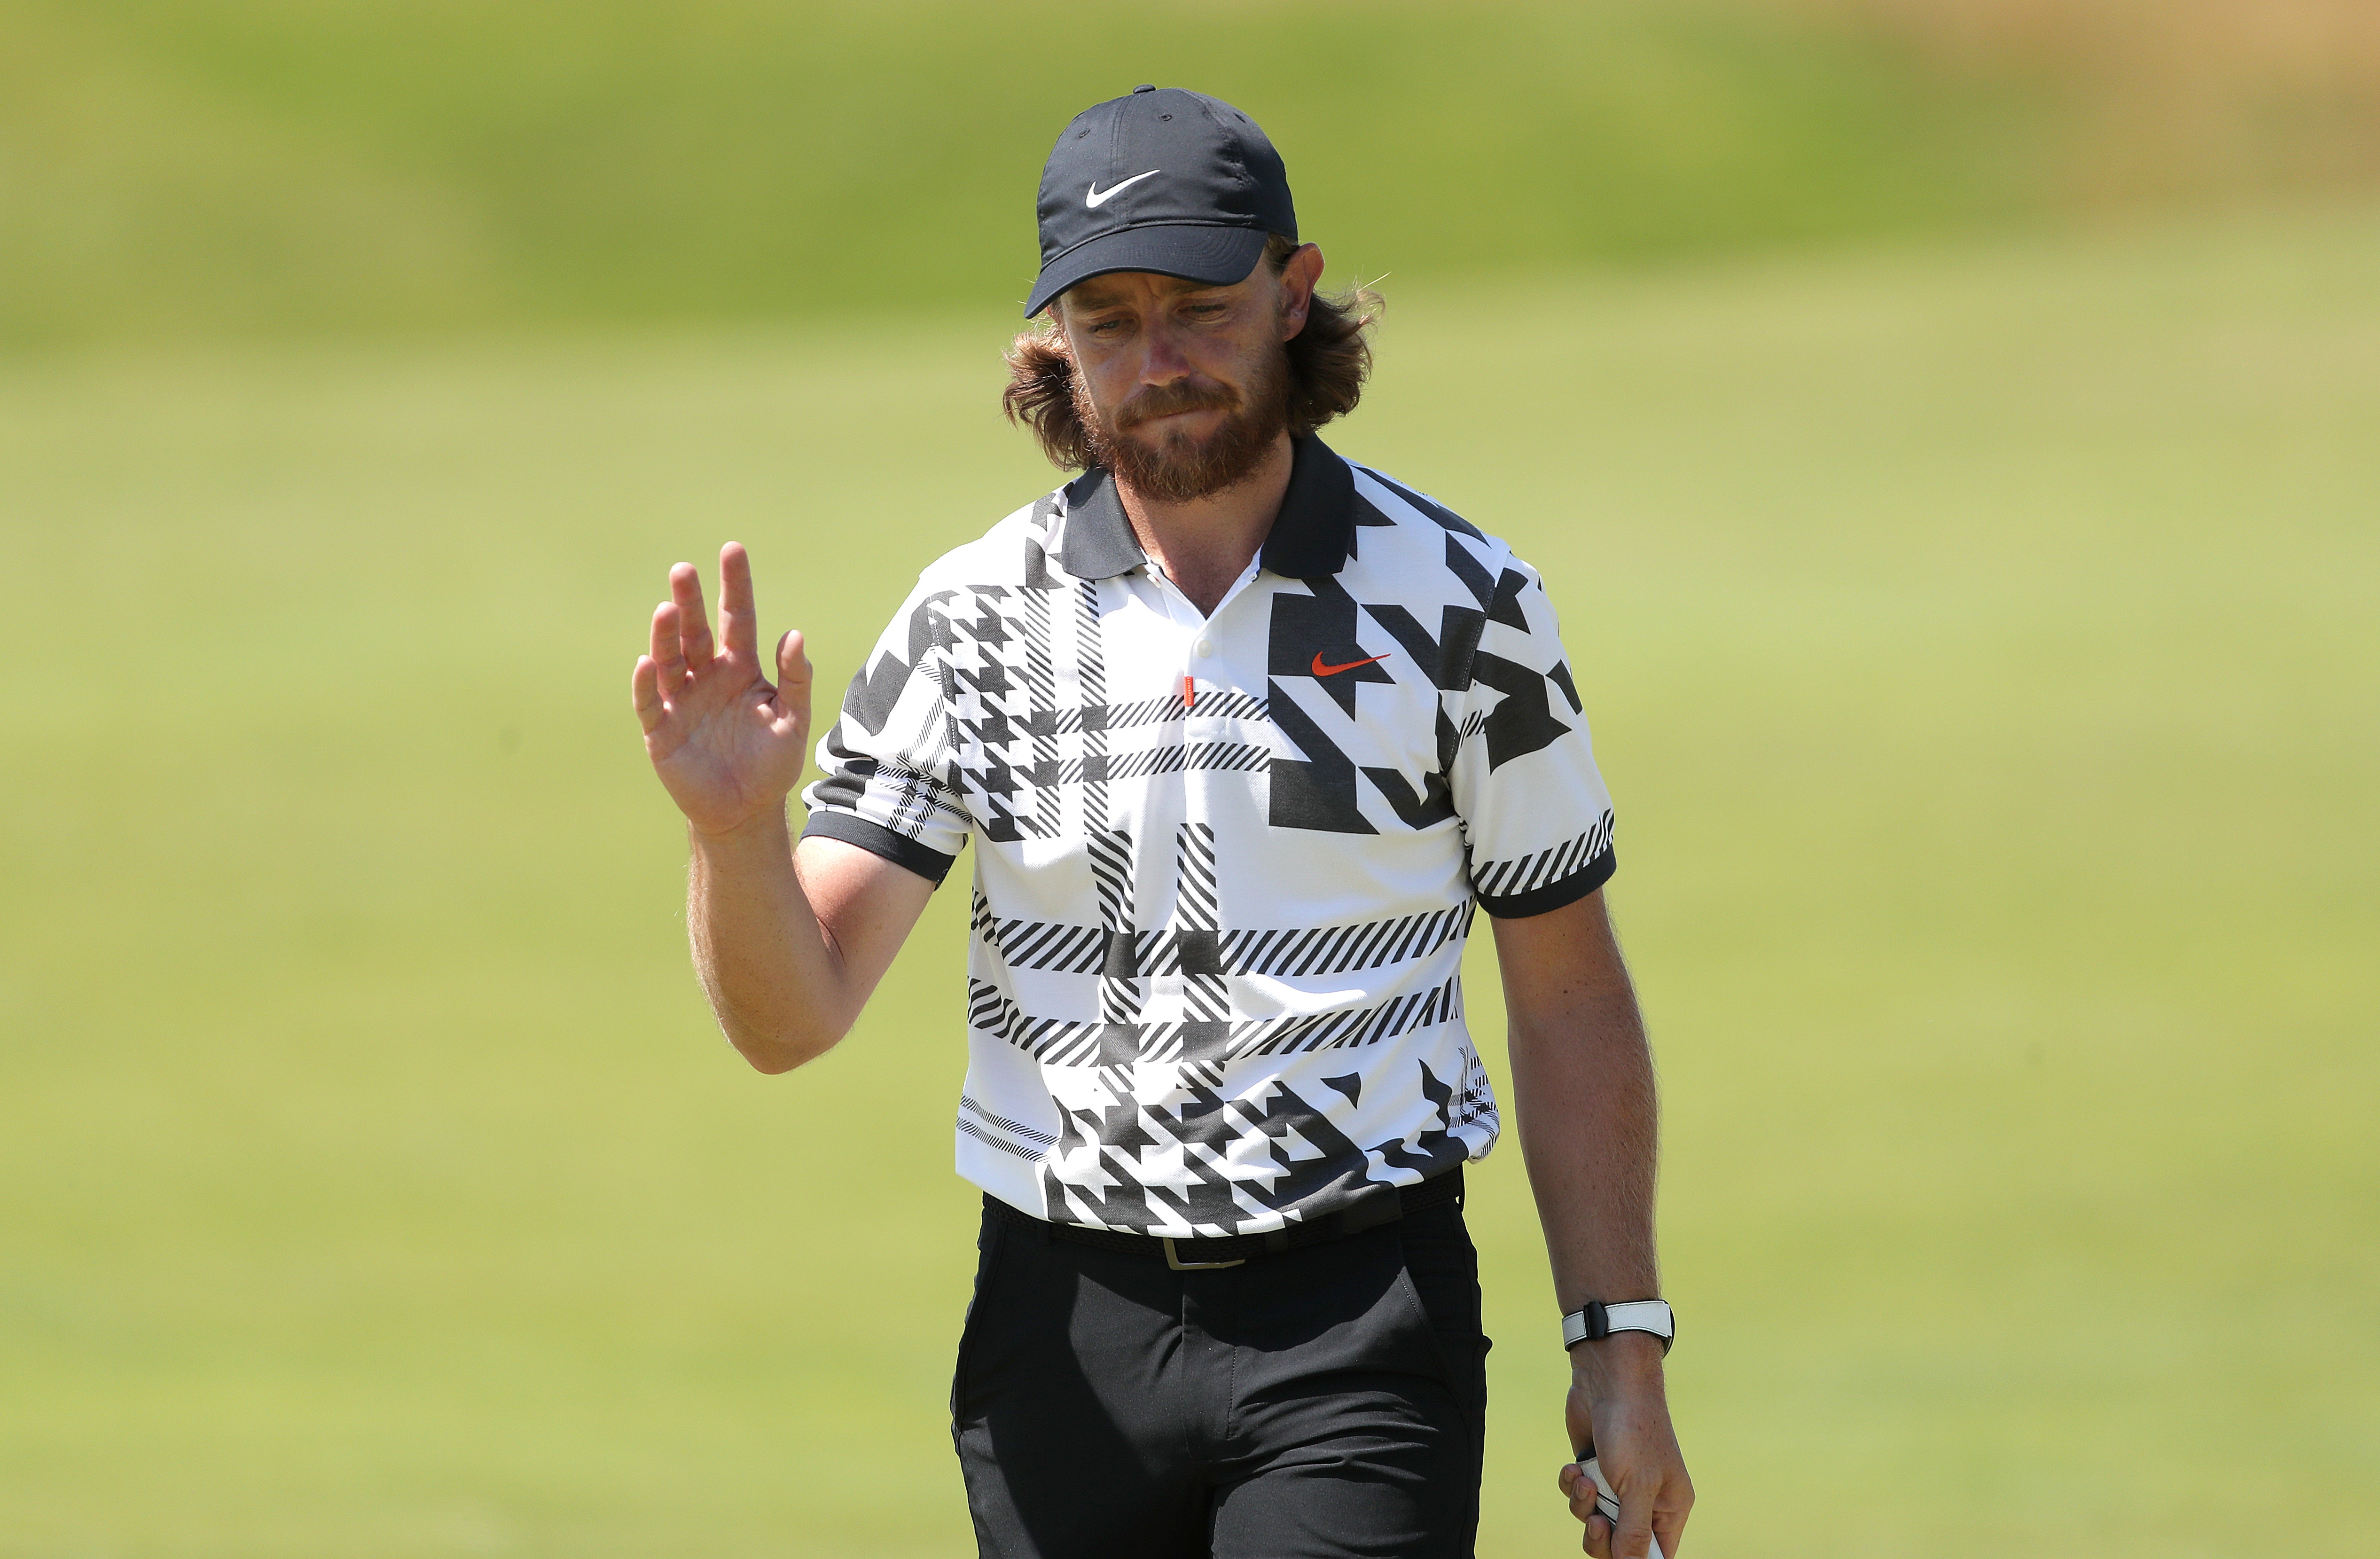 Tommy Fleetwood admitted a hairdryer is not the secret behind his locks (Richard Sellers/PA)